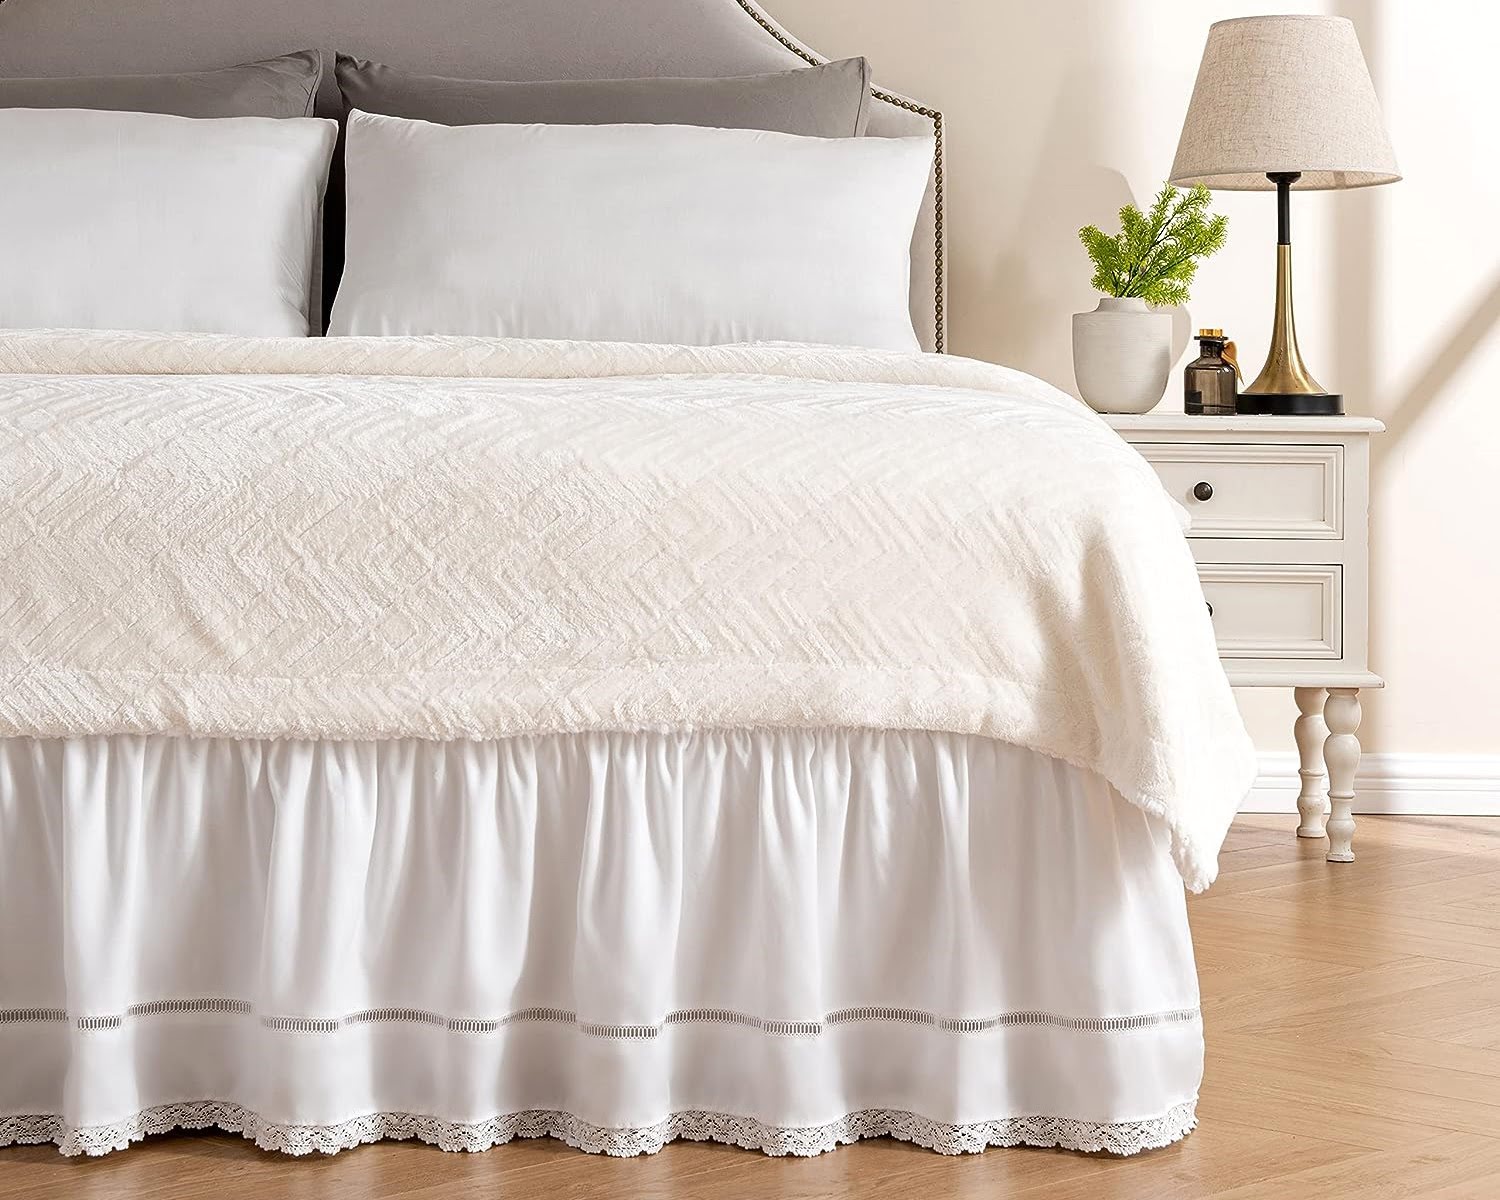 Stay Put Pins the best bed skirt pinsStay Put Pins creates a secure hold  for bed skirts, slipcovers, and linens